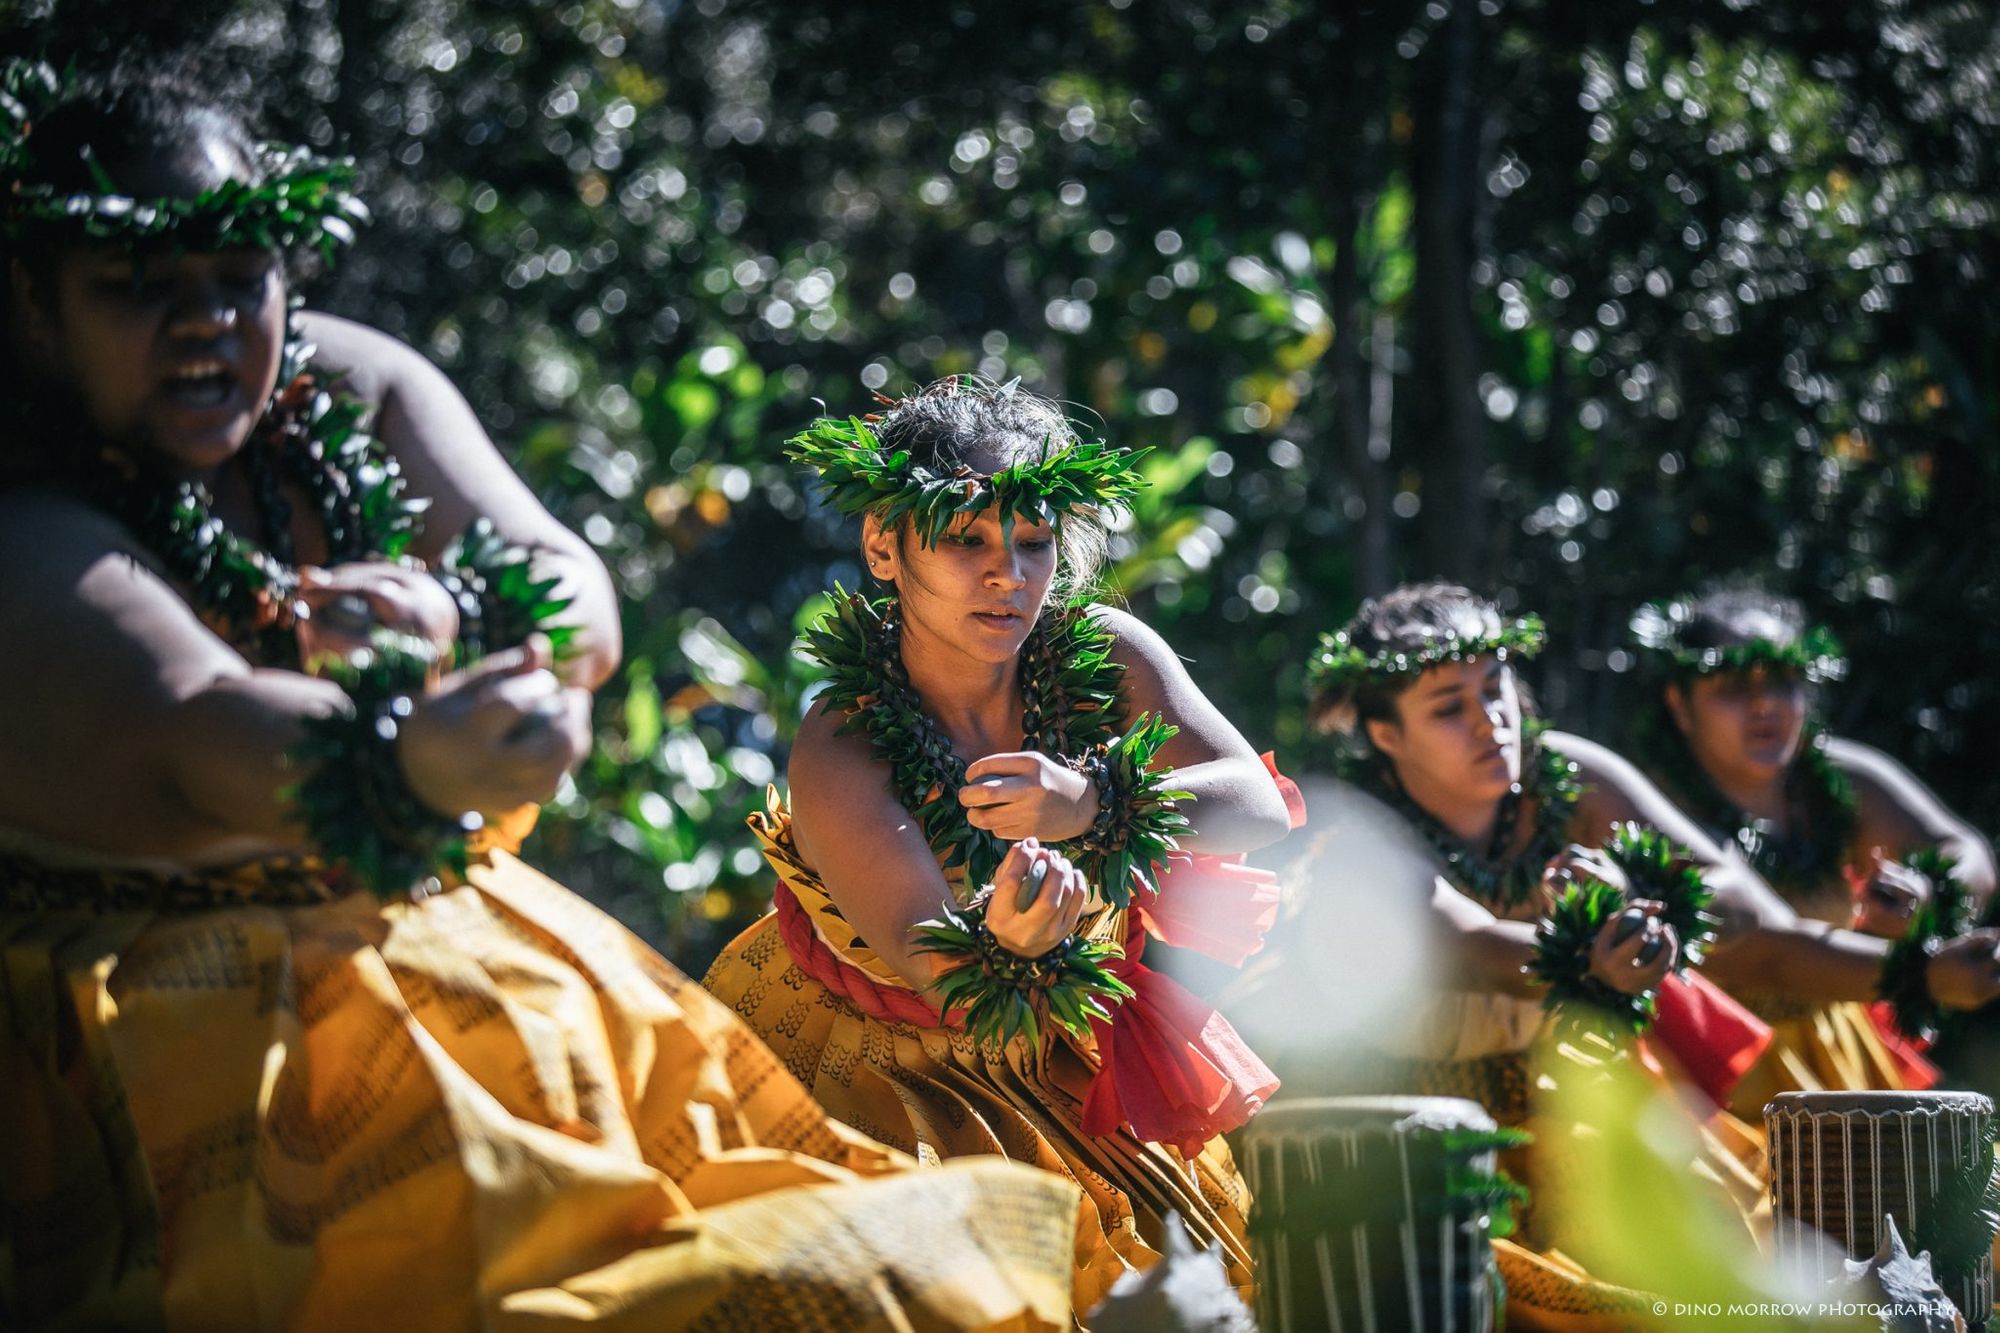 Our Annual Presentation at Kaʻauea, Winter Solstice, 2018